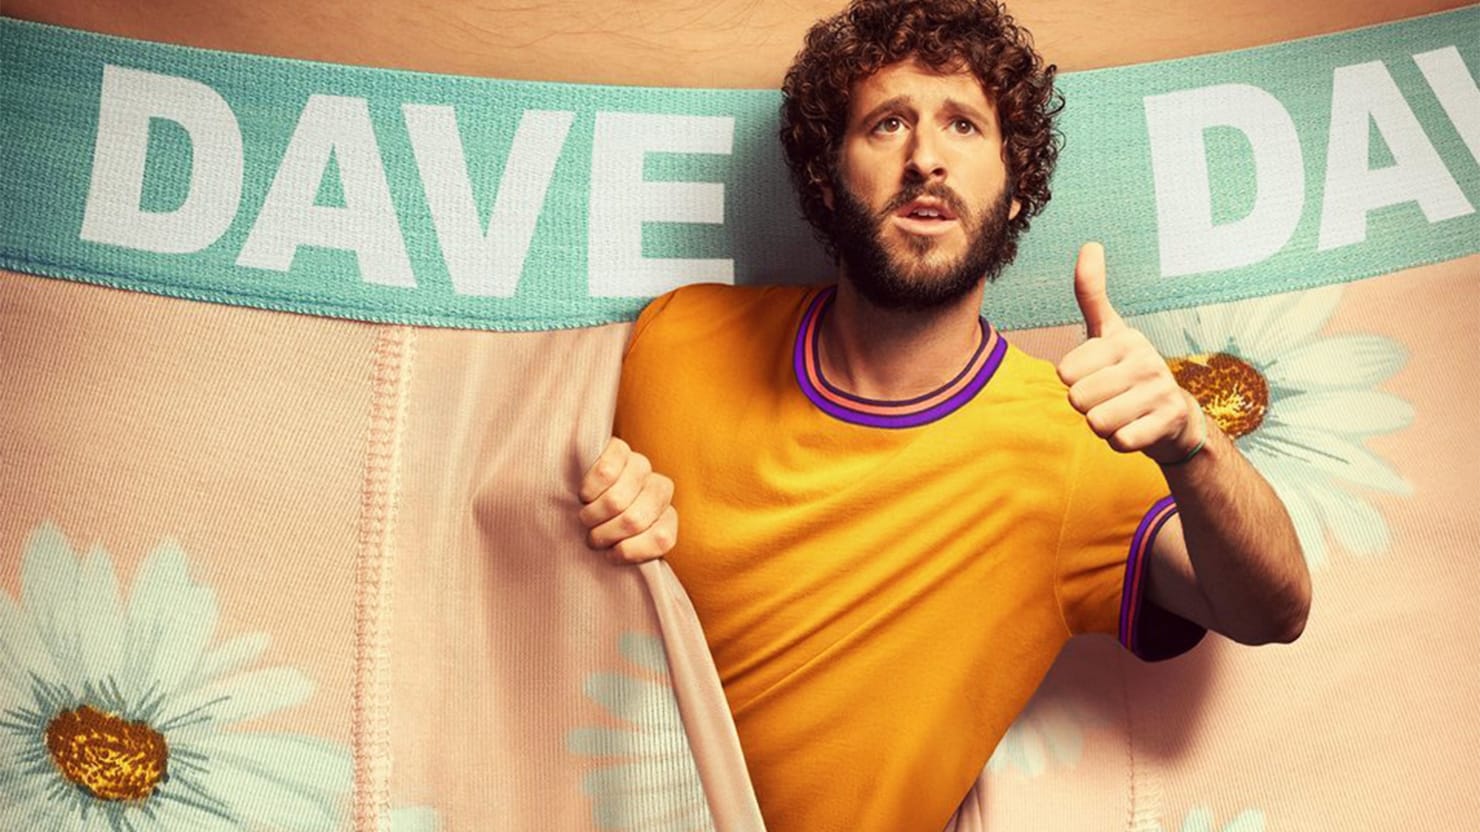 Lil dicky bisexual